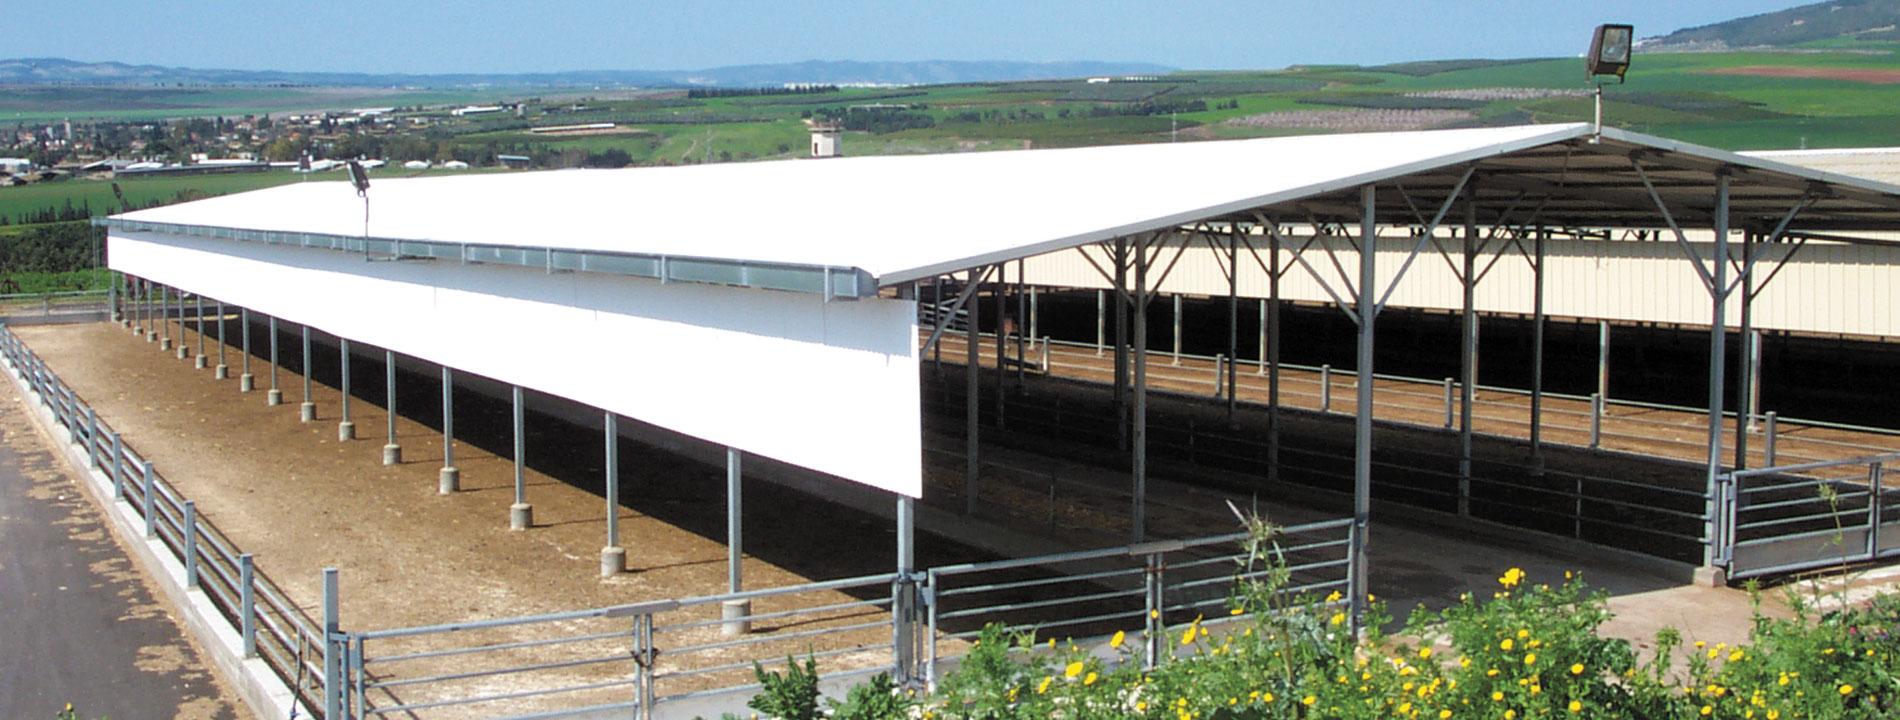 PALRUF Cowshed Roofing